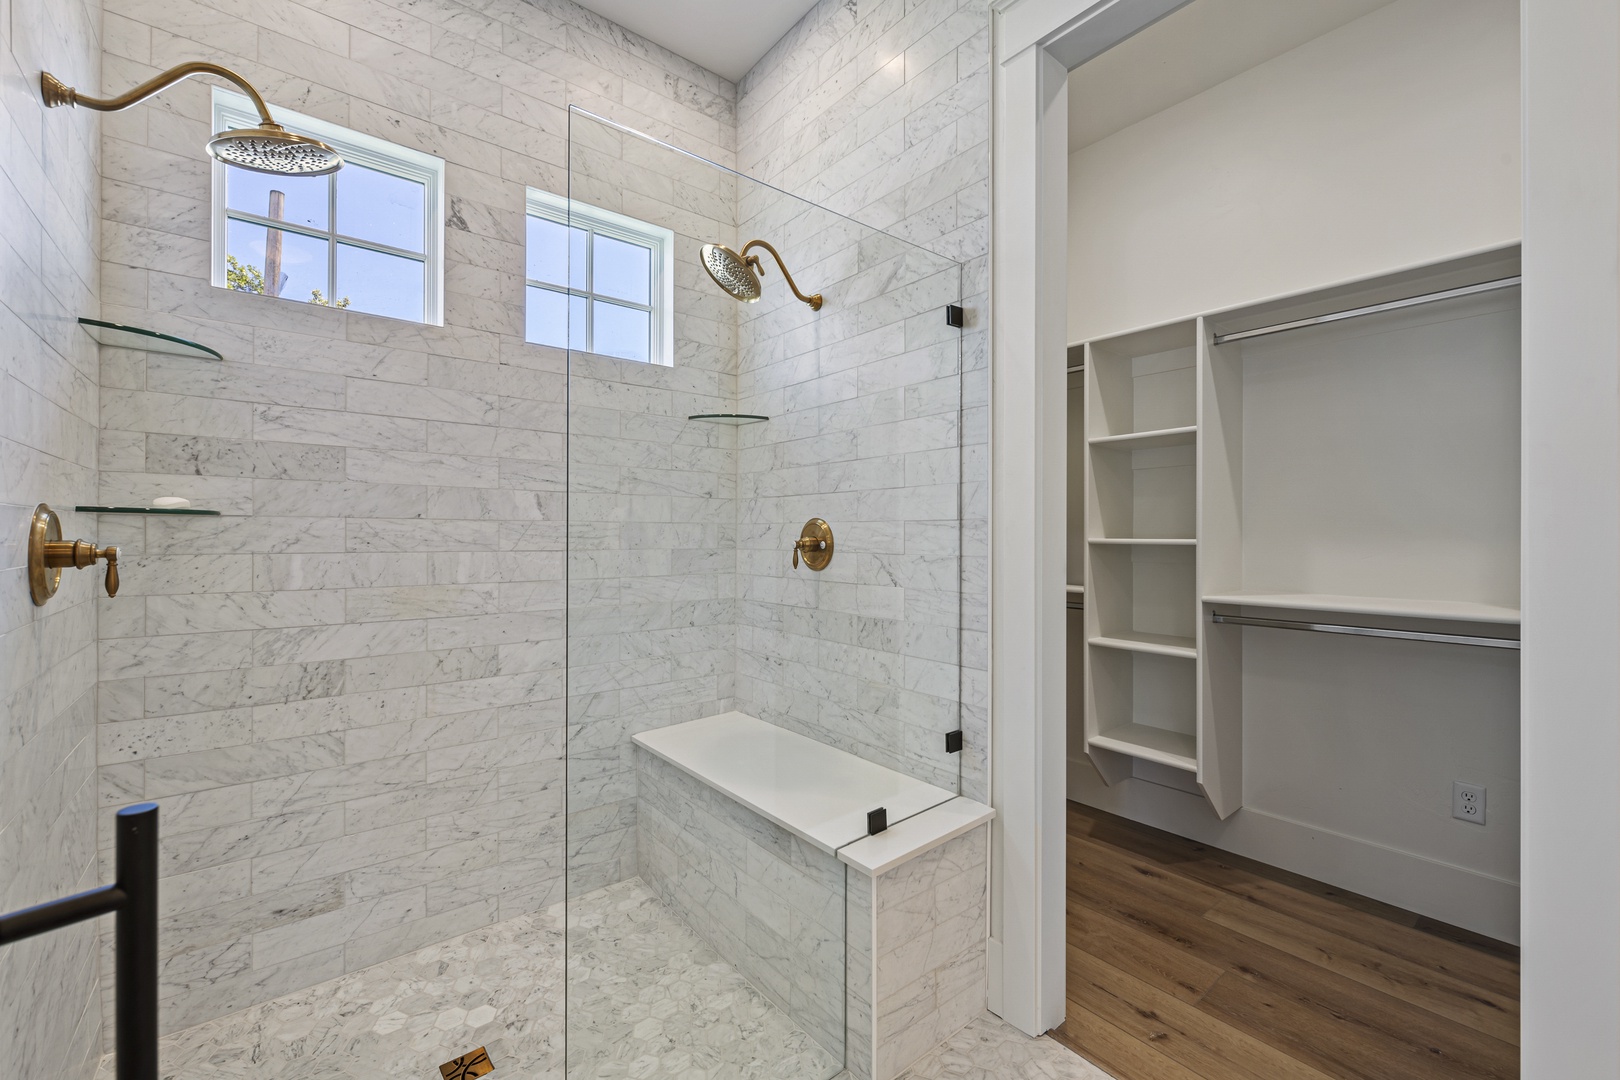 Main Street Manor-Master Ensuite (3/4 bath) with Dual Shower Heads and Bench)